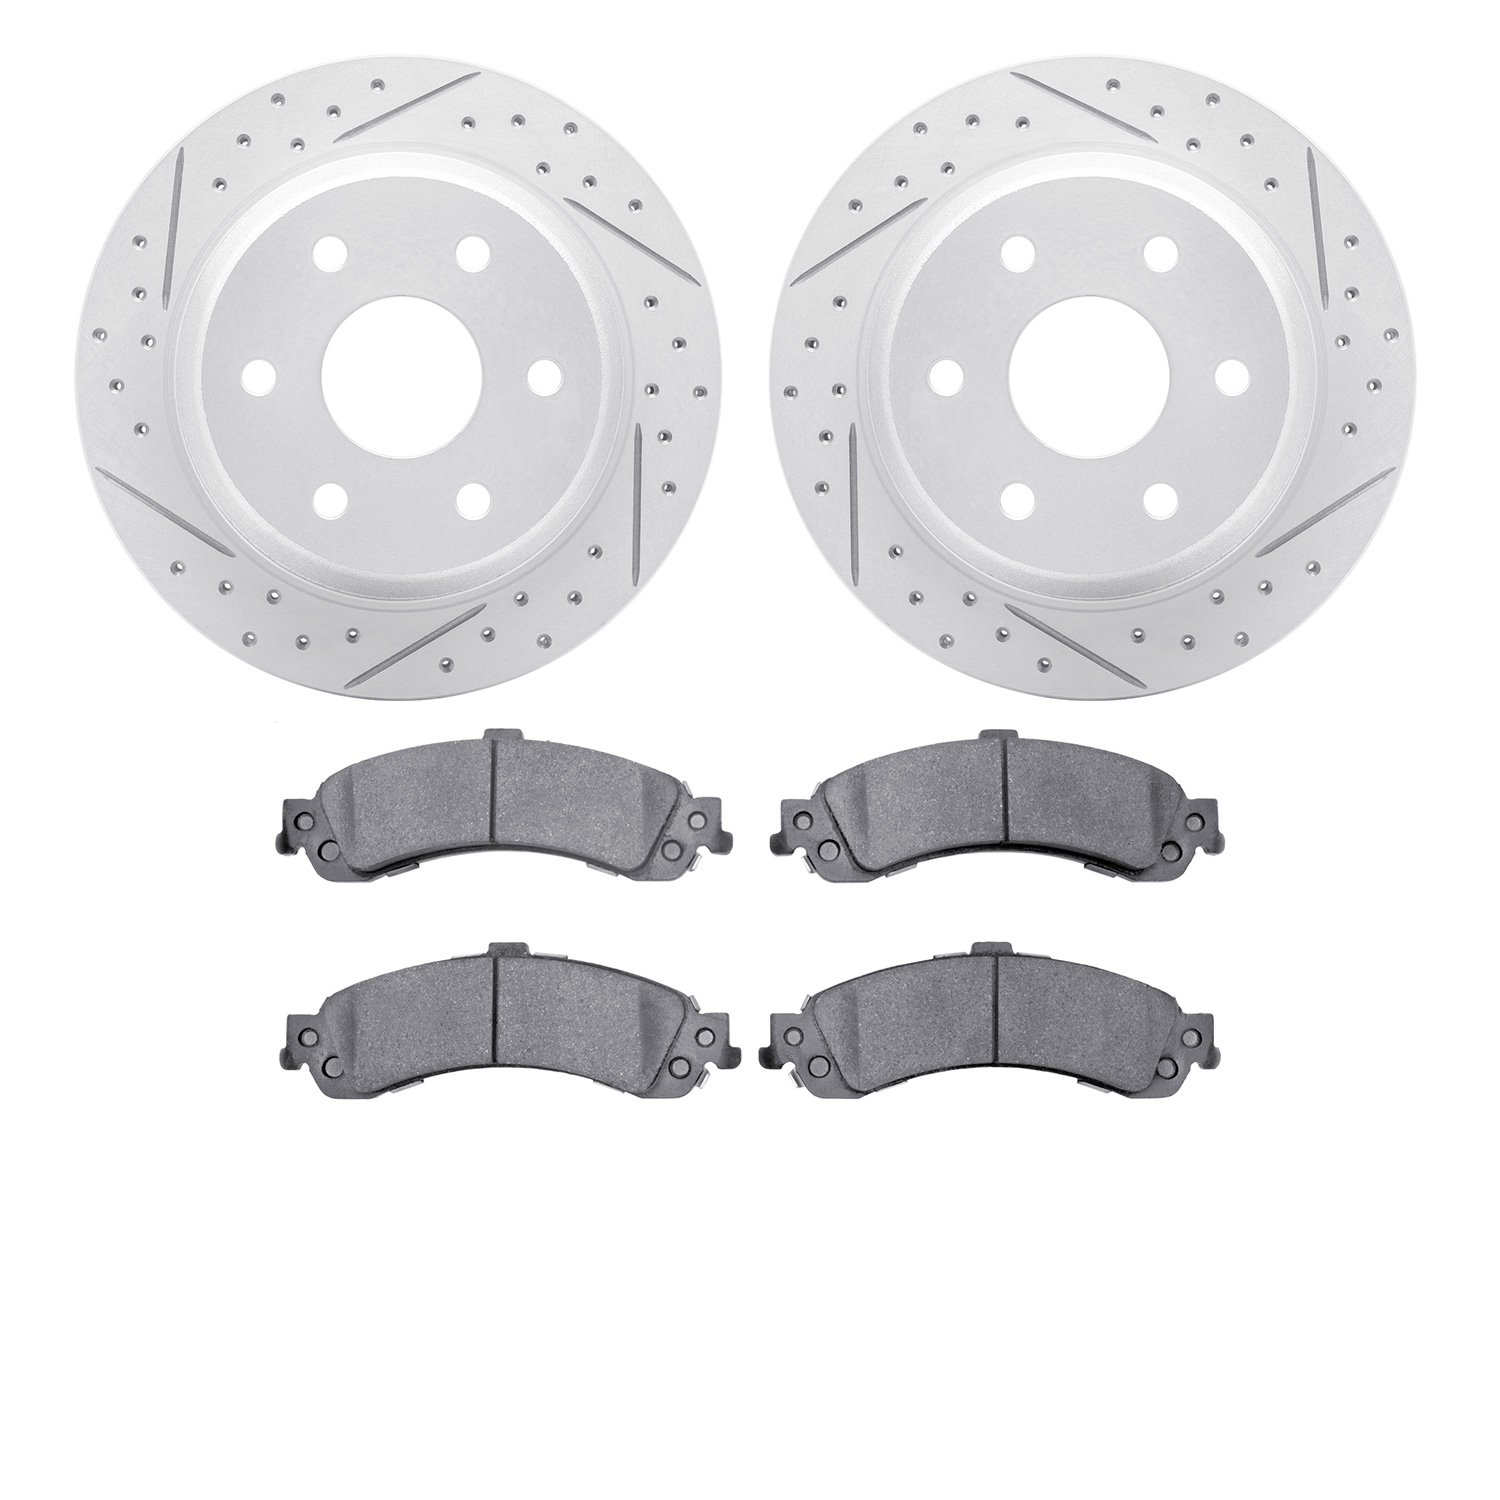 2502-48044 Geoperformance Drilled/Slotted Rotors w/5000 Advanced Brake Pads Kit, 2000-2006 GM, Position: Rear